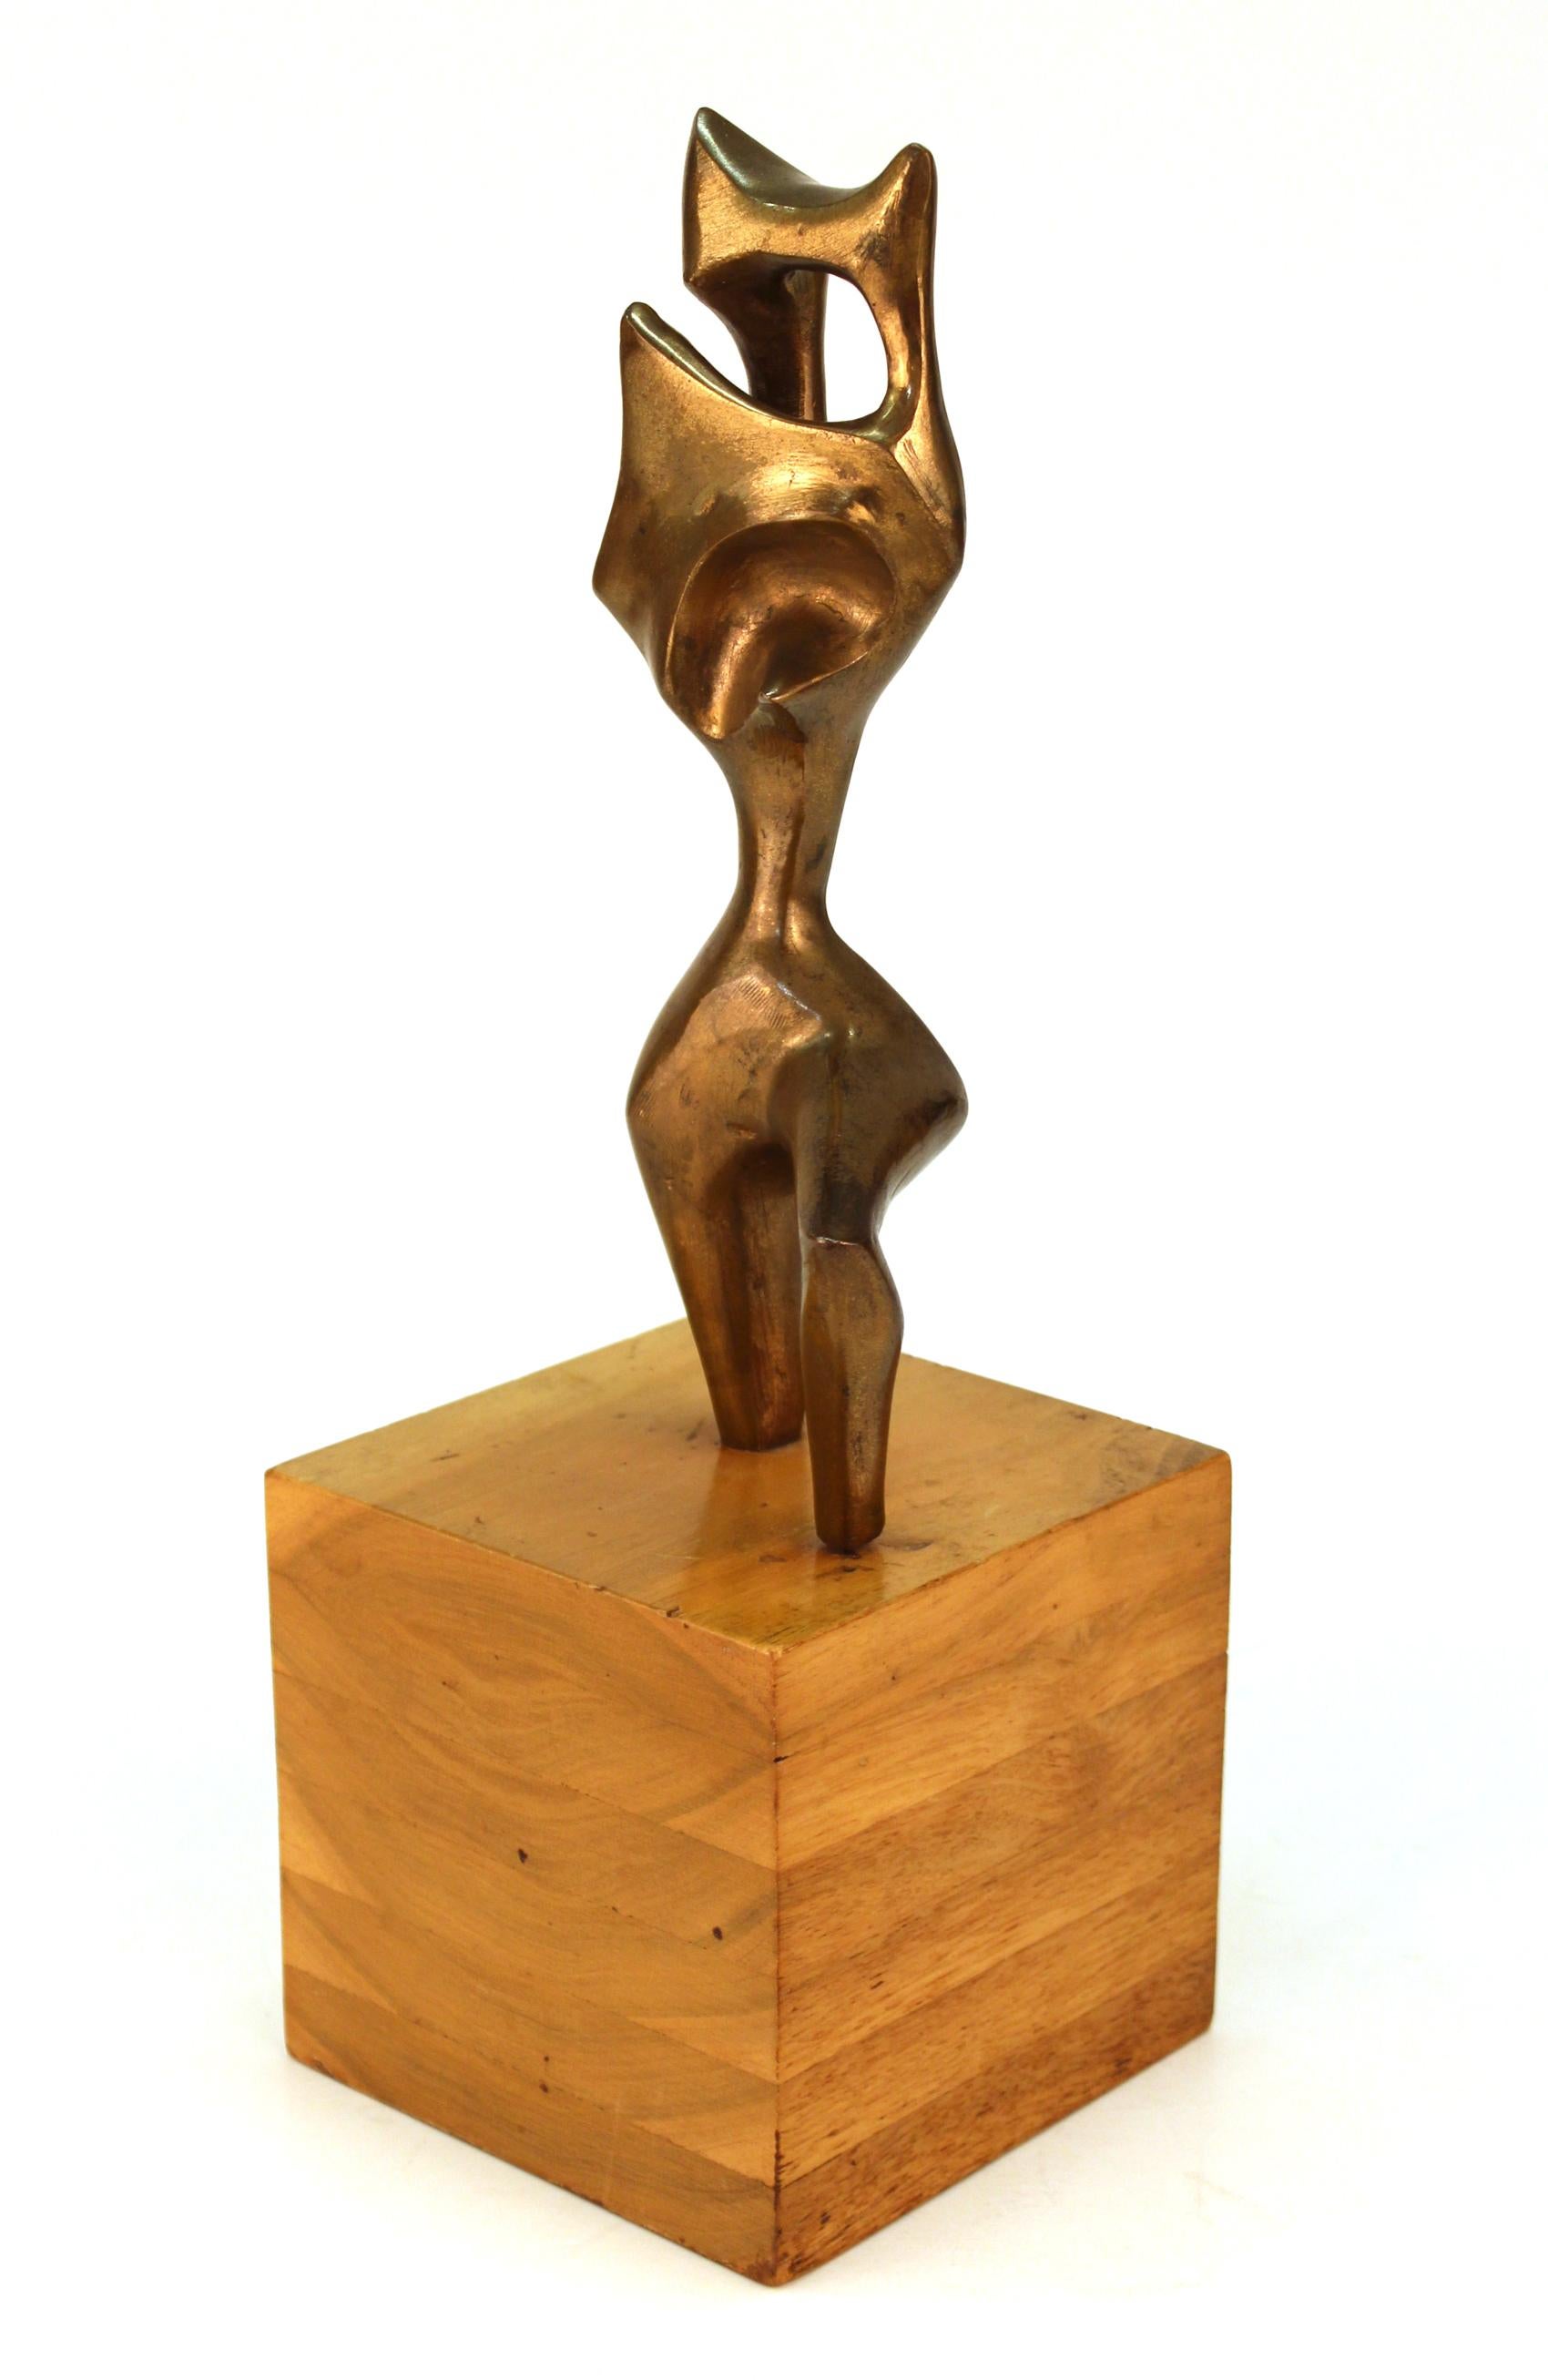 Surrealist abstract sculpture in patinated bronze in the manner of Wifredo Lam or Yves Tanguy. The sculpture depicts an abstract figure on one knee, atop a wooden cube base and is marked 'W' and numbered. Created in the United States in the